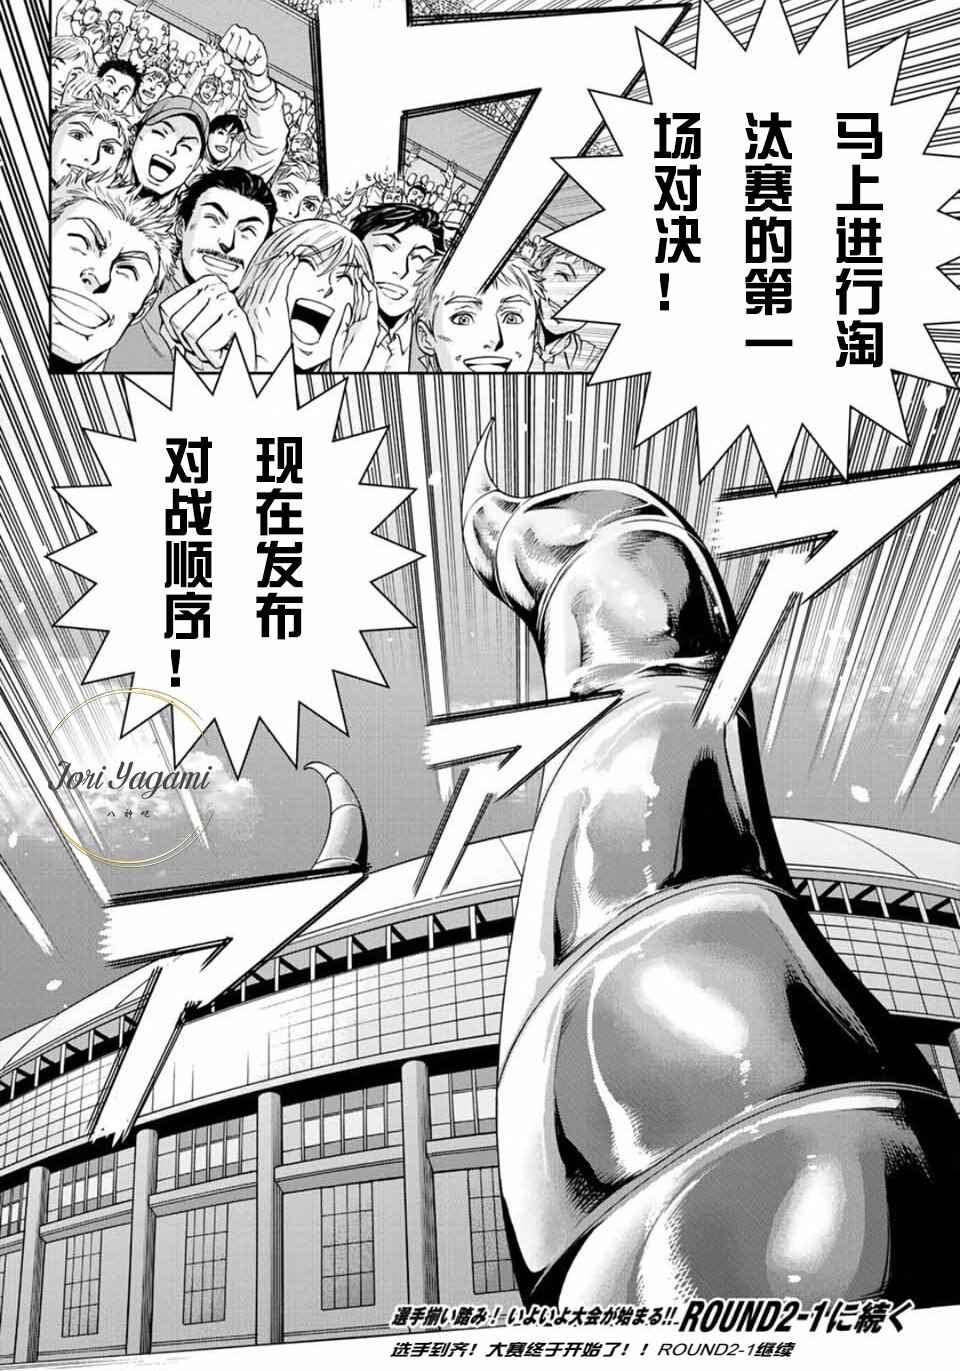 《THE KING OF FIGHTERS～A NEW BEGINNING～》漫画 ANEWBEGINNING 006话